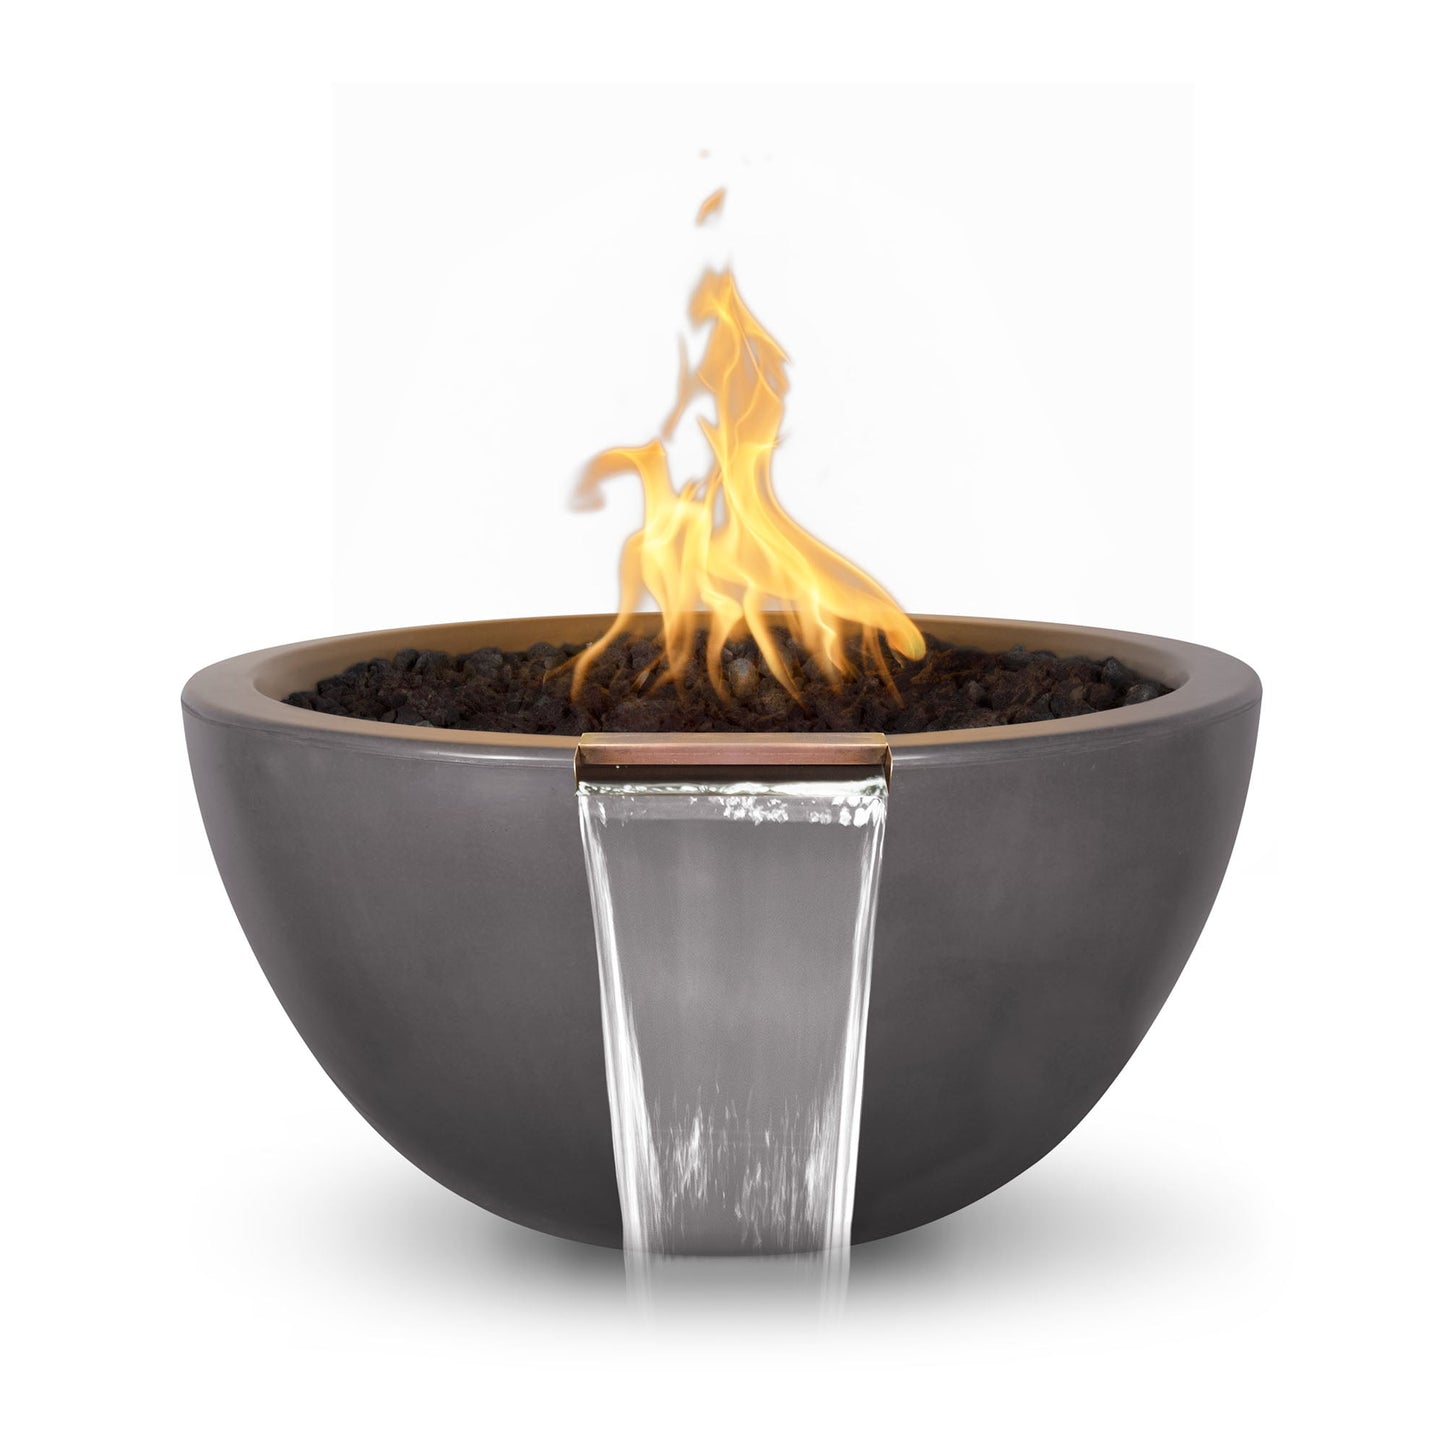 The Outdoor Plus Round Luna 38" Gray GFRC Concrete Liquid Propane Fire & Water Bowl with Match Lit with Flame Sense Ignition